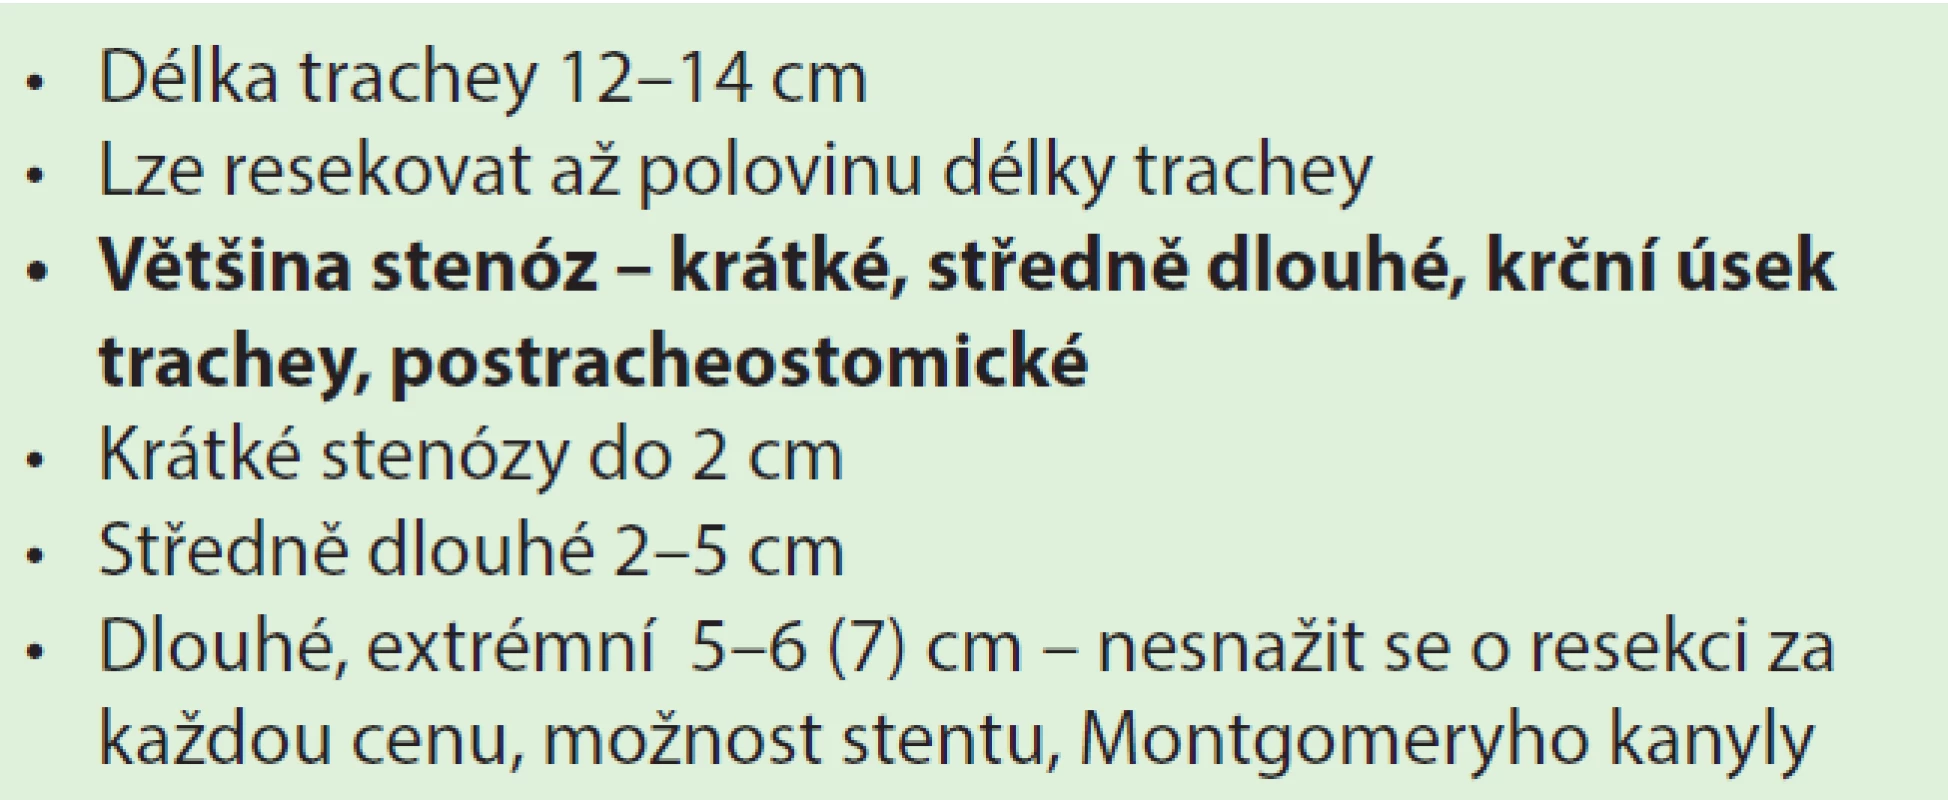 Délka resekce
Tab. 4: Length of resection